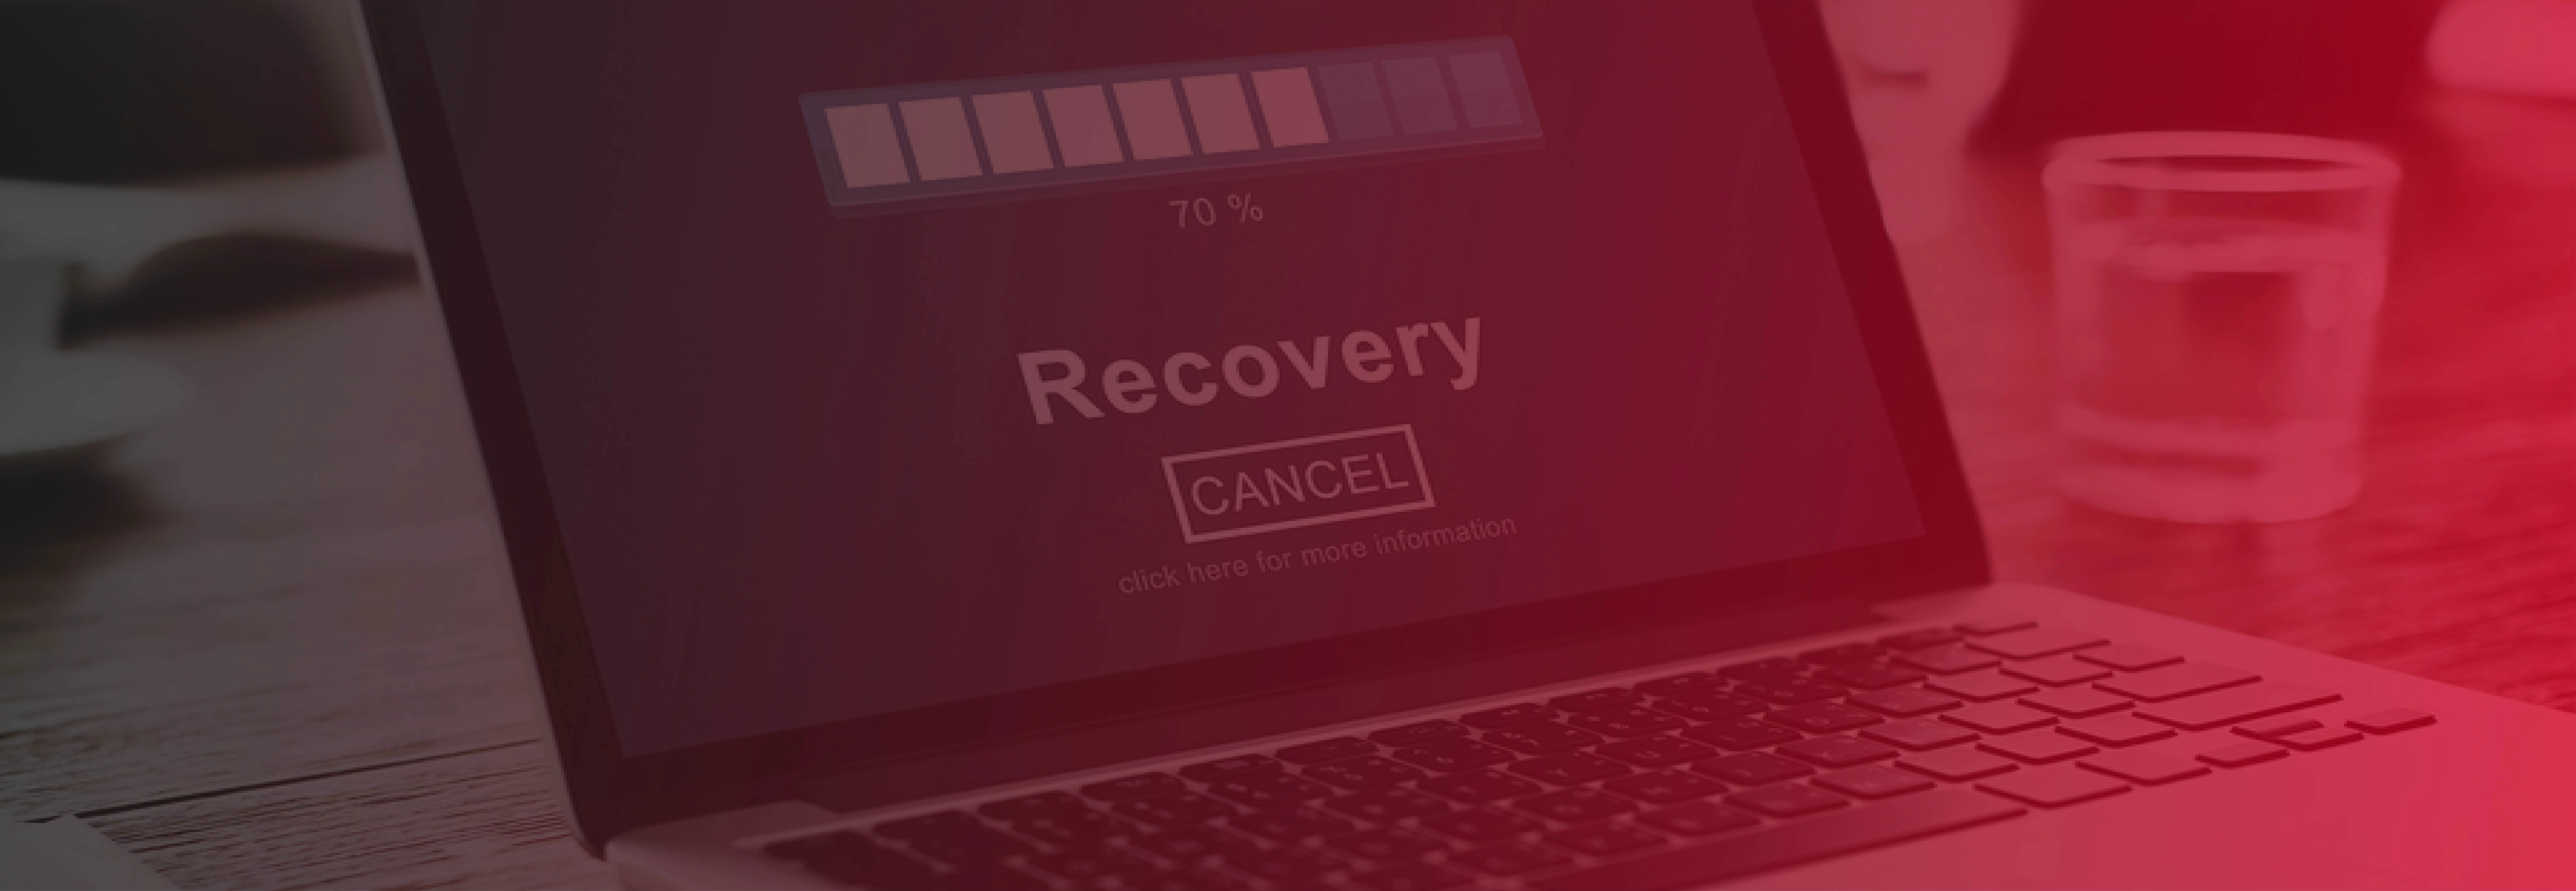 Data Recovery image